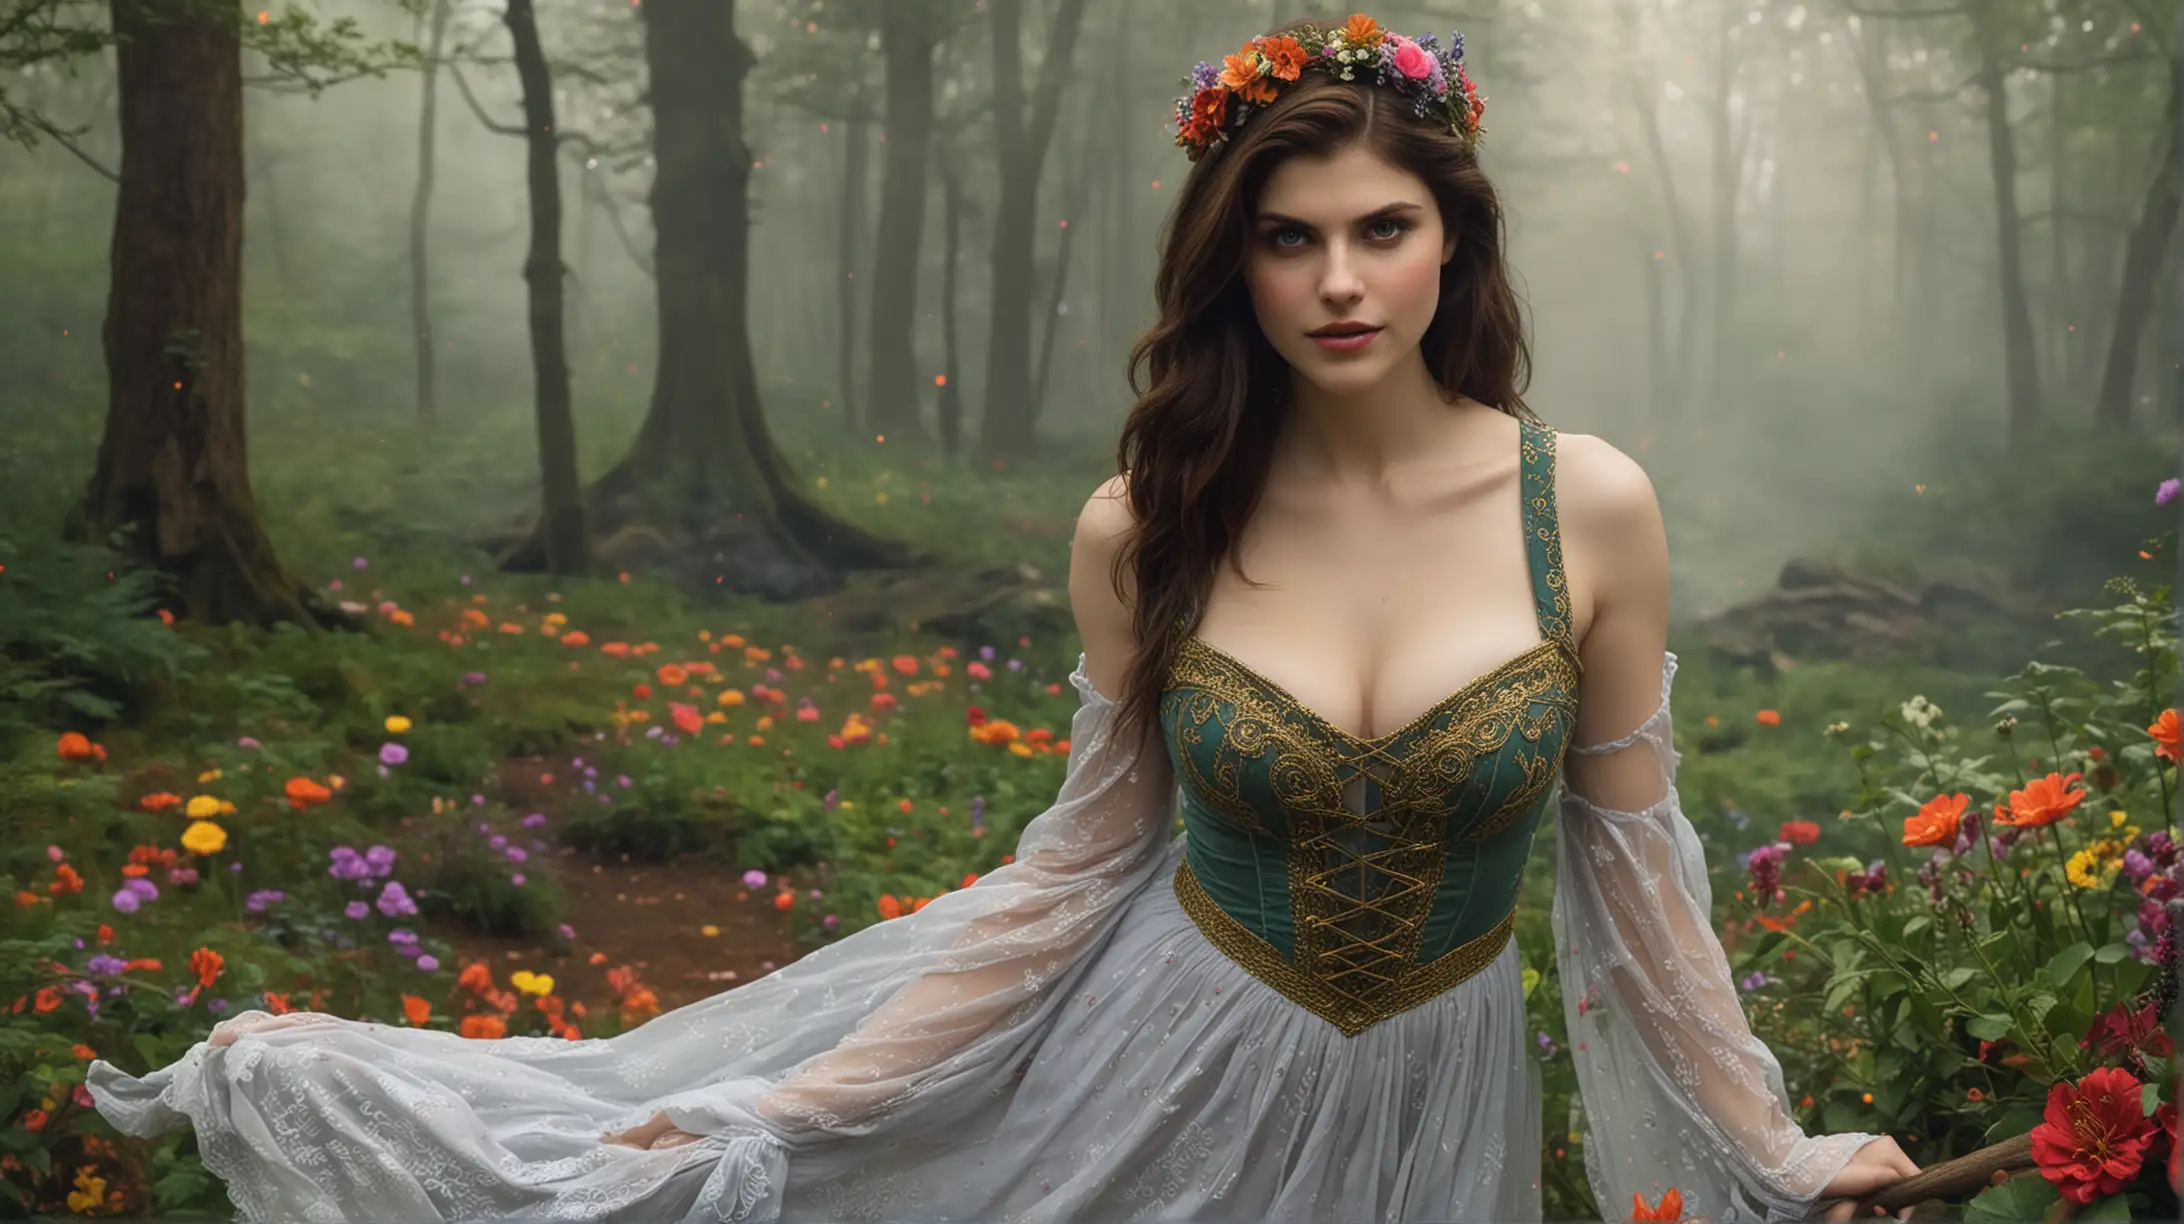 Enchanting Celtic Princess Alexandra Daddario Surrounded by Colorful Flowers in a Fantasy Forest